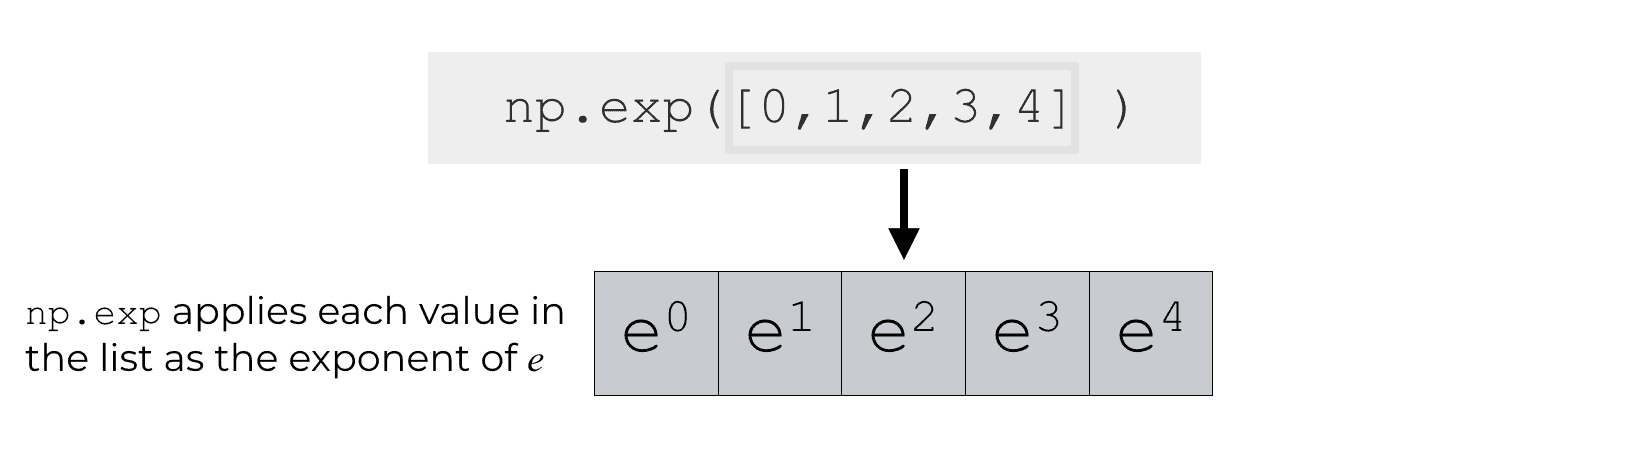 An explanation of how numpy.exp operates on a 1-d array.